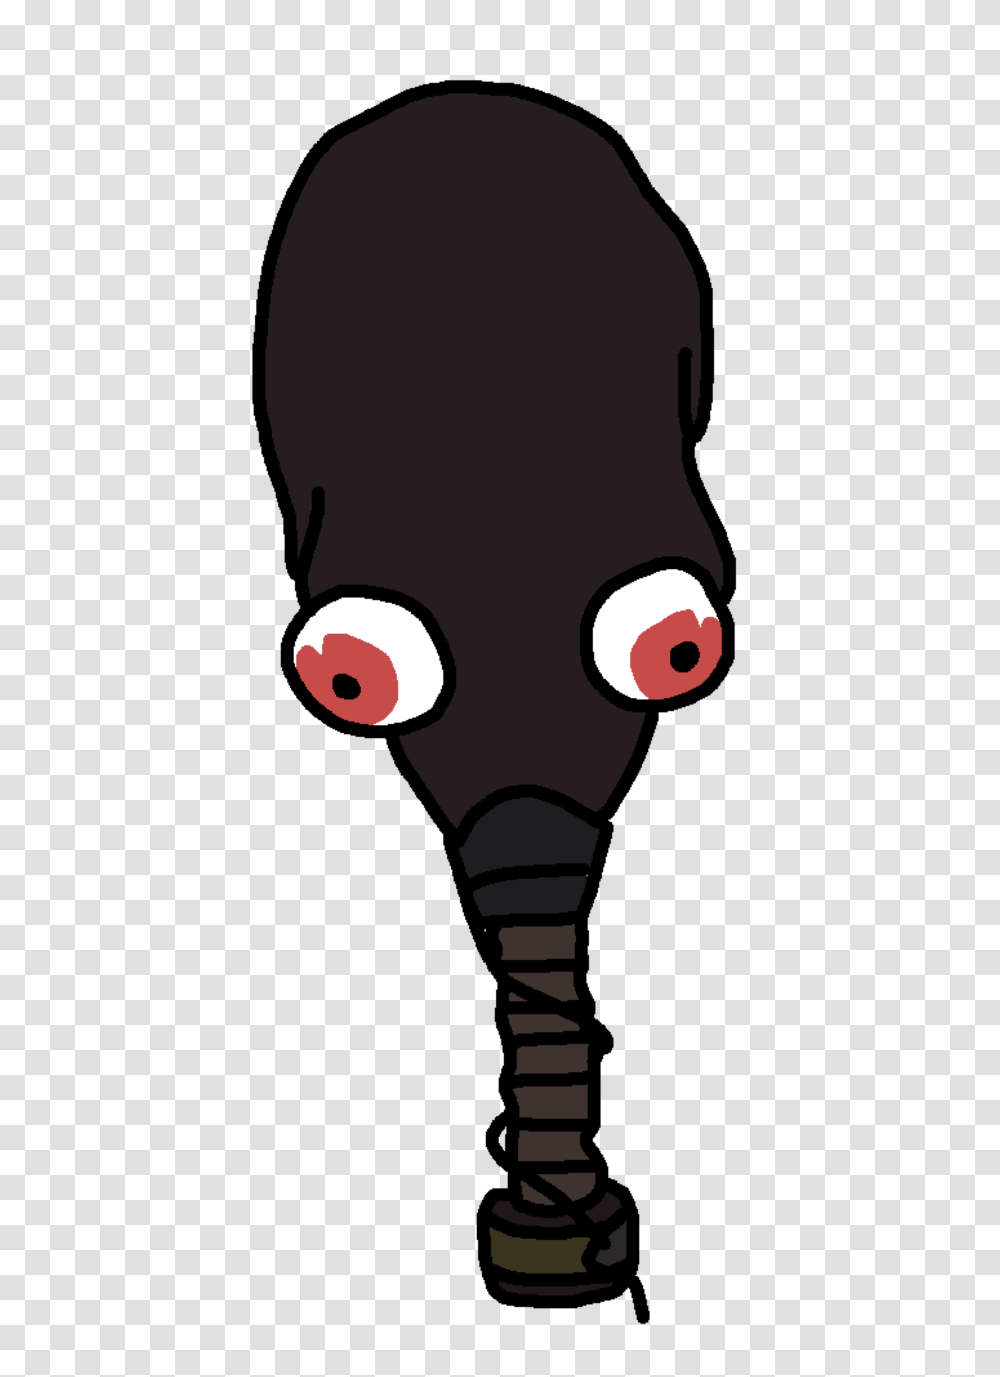 Pyro Alien Head, Tunnel, Light, Aircraft, Vehicle Transparent Png